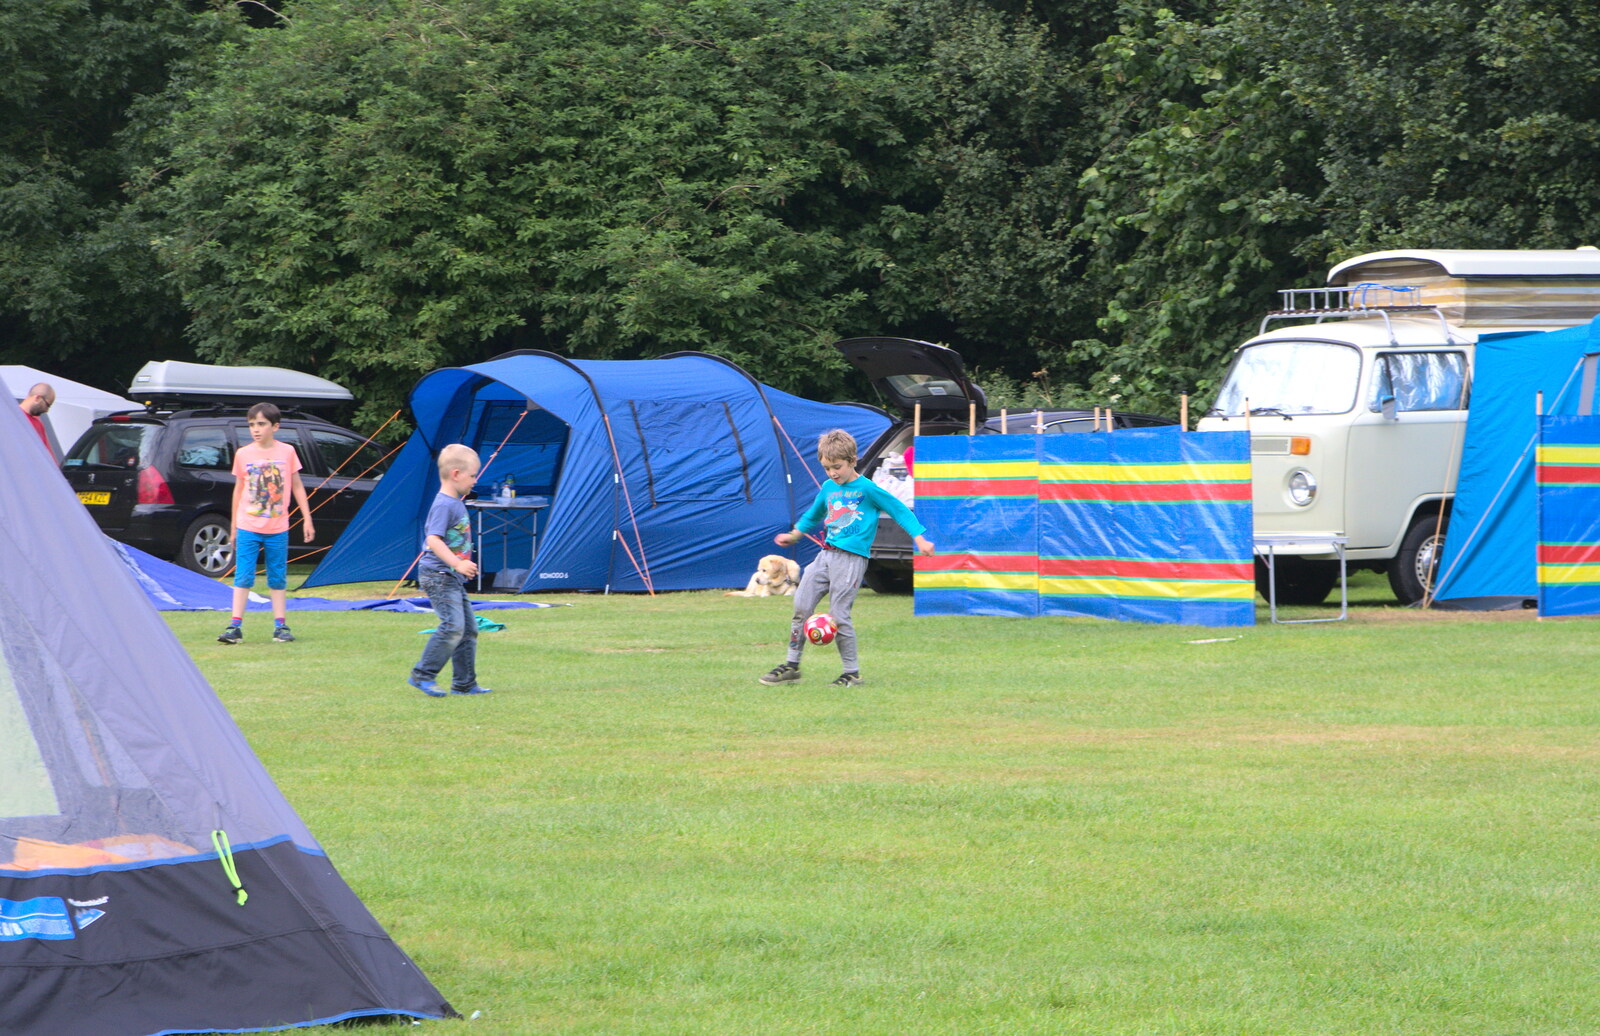 Fred plays footie from Camping in West Runton, North Norfolk - 30th July 2016